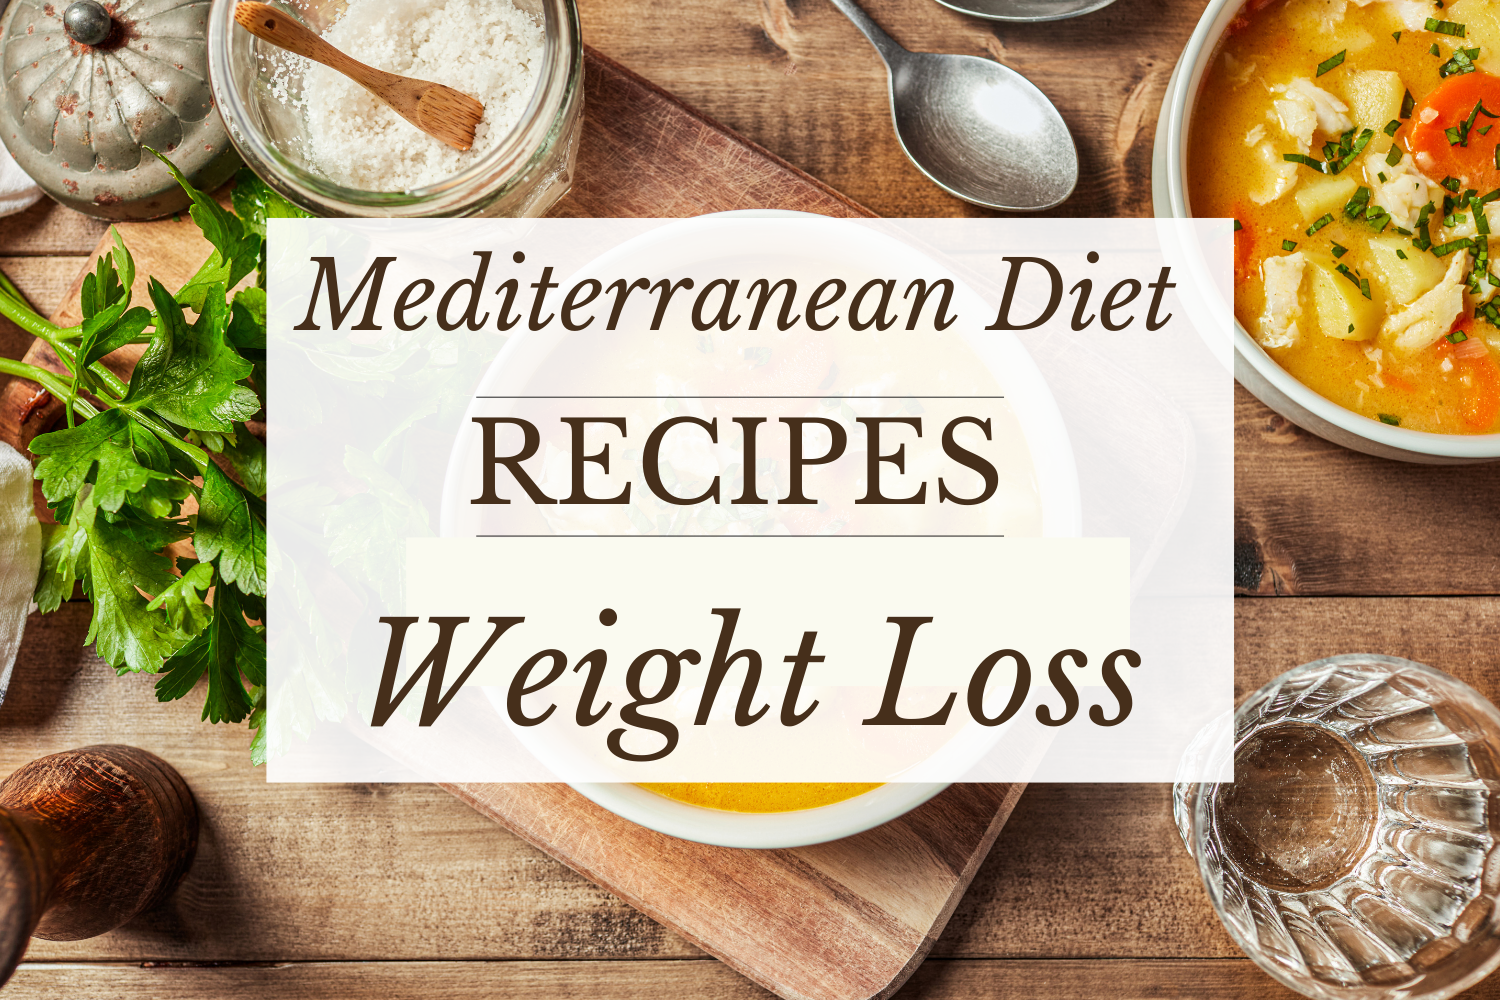 Mediterranean Diet Recipes for Weight Loss (1500 × 1000 px)